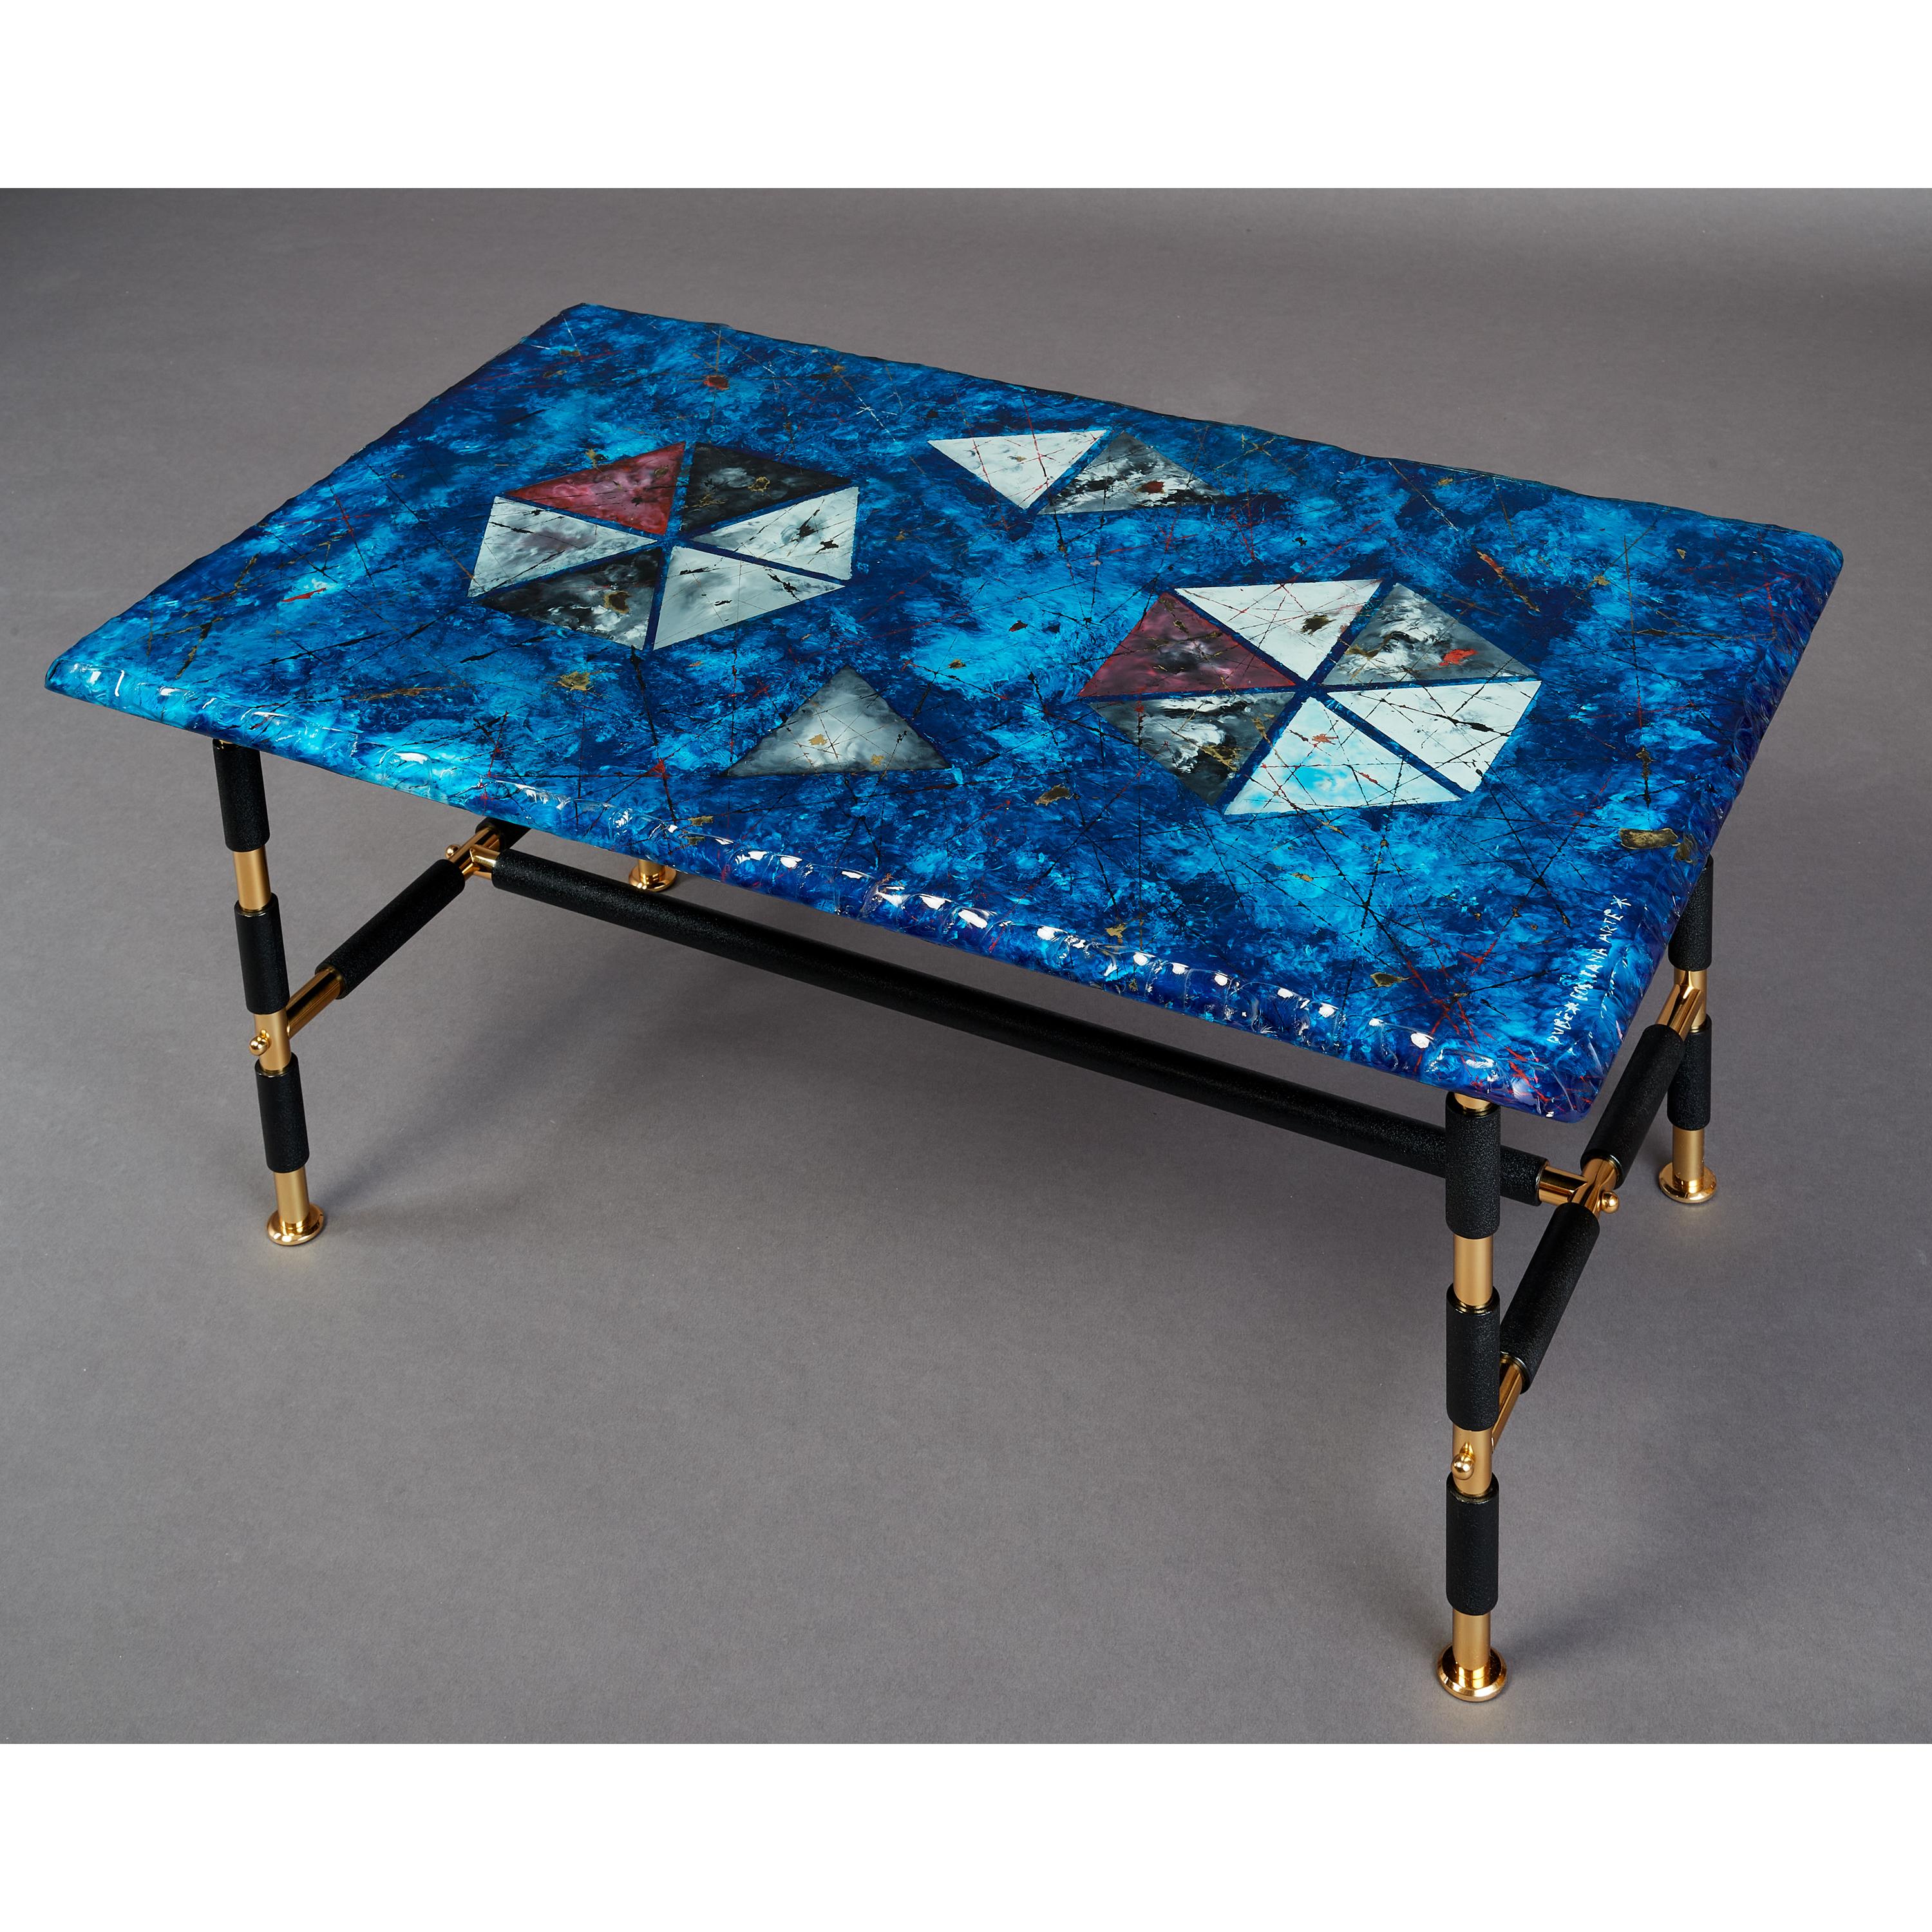 Dube for Fontana Arte.
Duilio Barnabe (1914-1961)
A stunning Fontana Arte coffee table, with chiseled edge back painted glass top by Duilio Barnabe in rich shades of blue, red, gold and abstracted decor.
Italy, 1950's
Measures: 35 W x 21.5 D x 17 H.